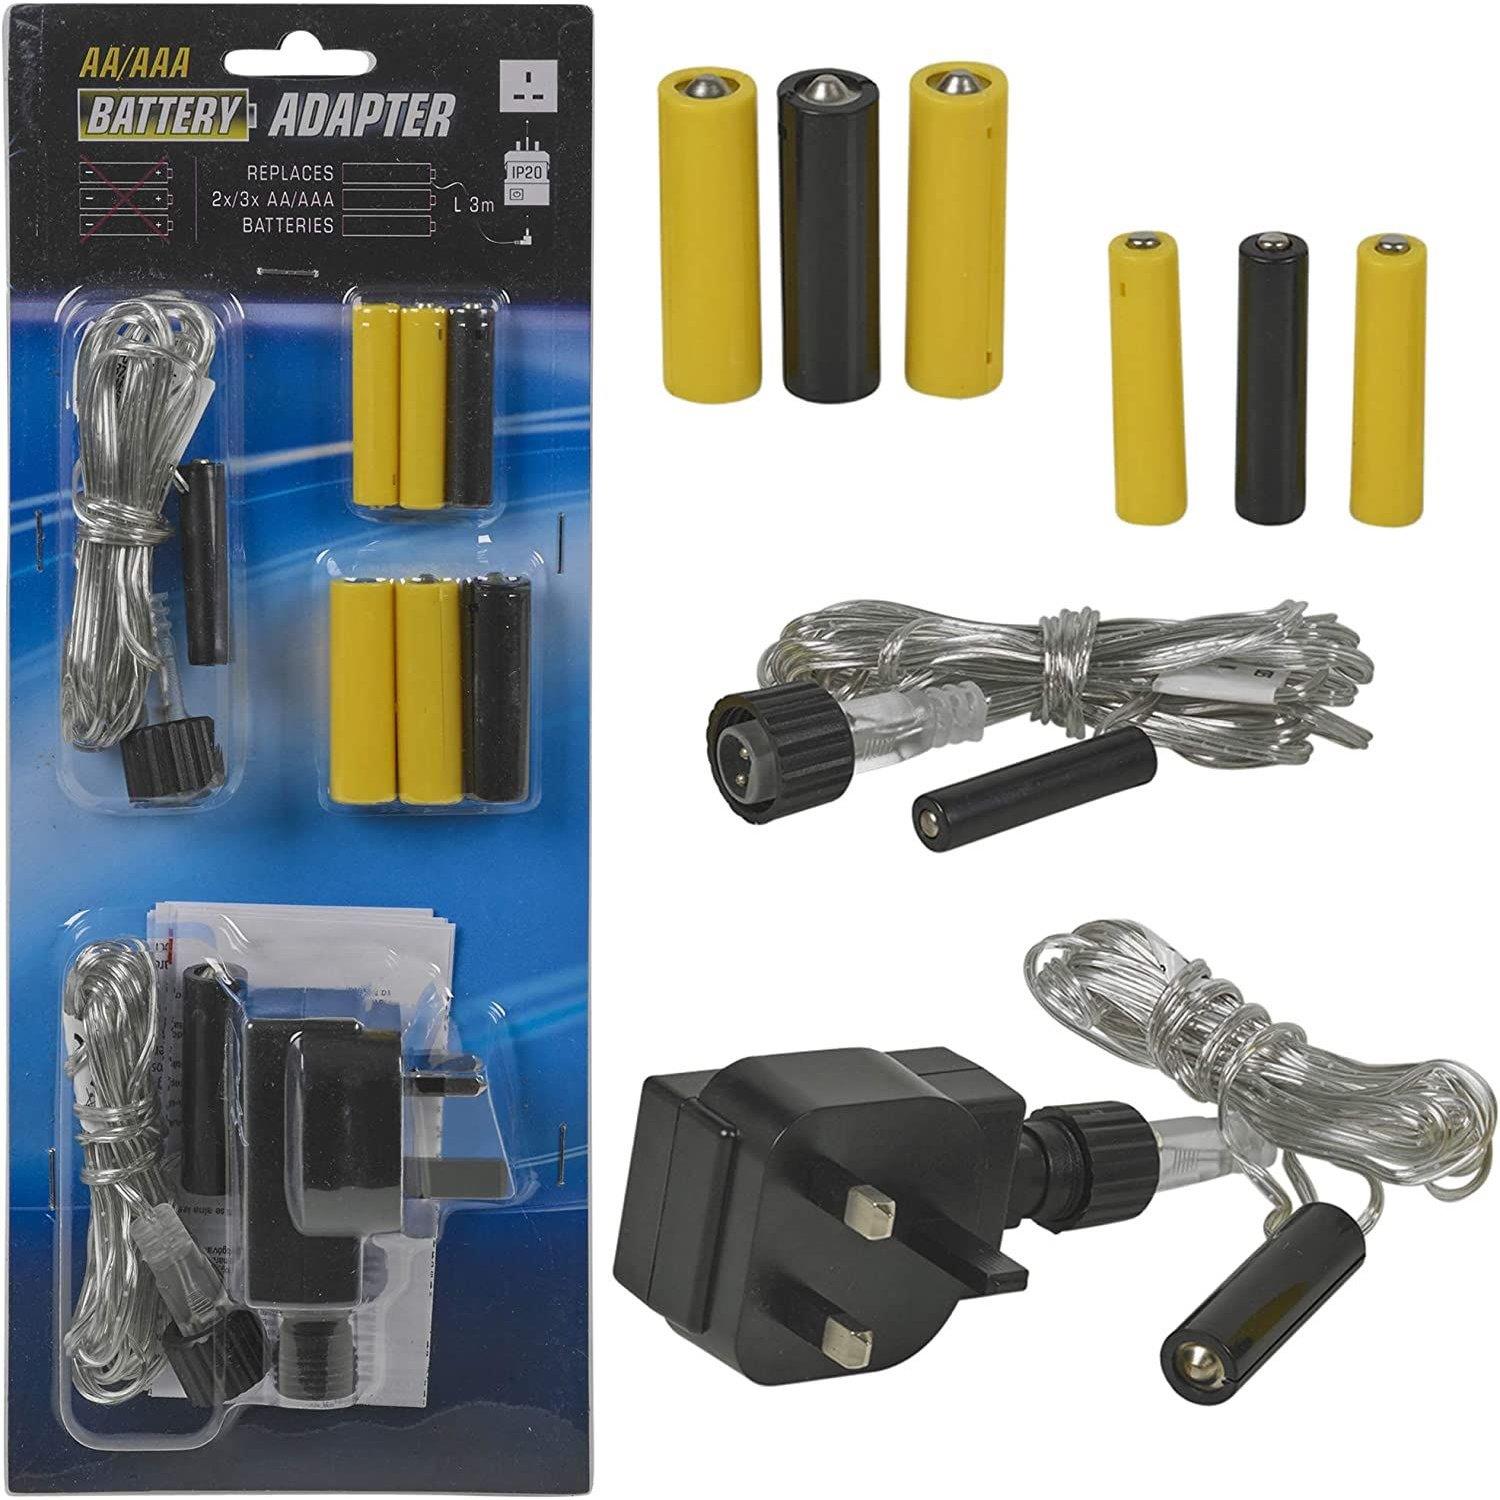 Geezy Battery Eliminator AA/AAA Battery Adaptor Battery Eliminator for Decorations and Electronic Devices